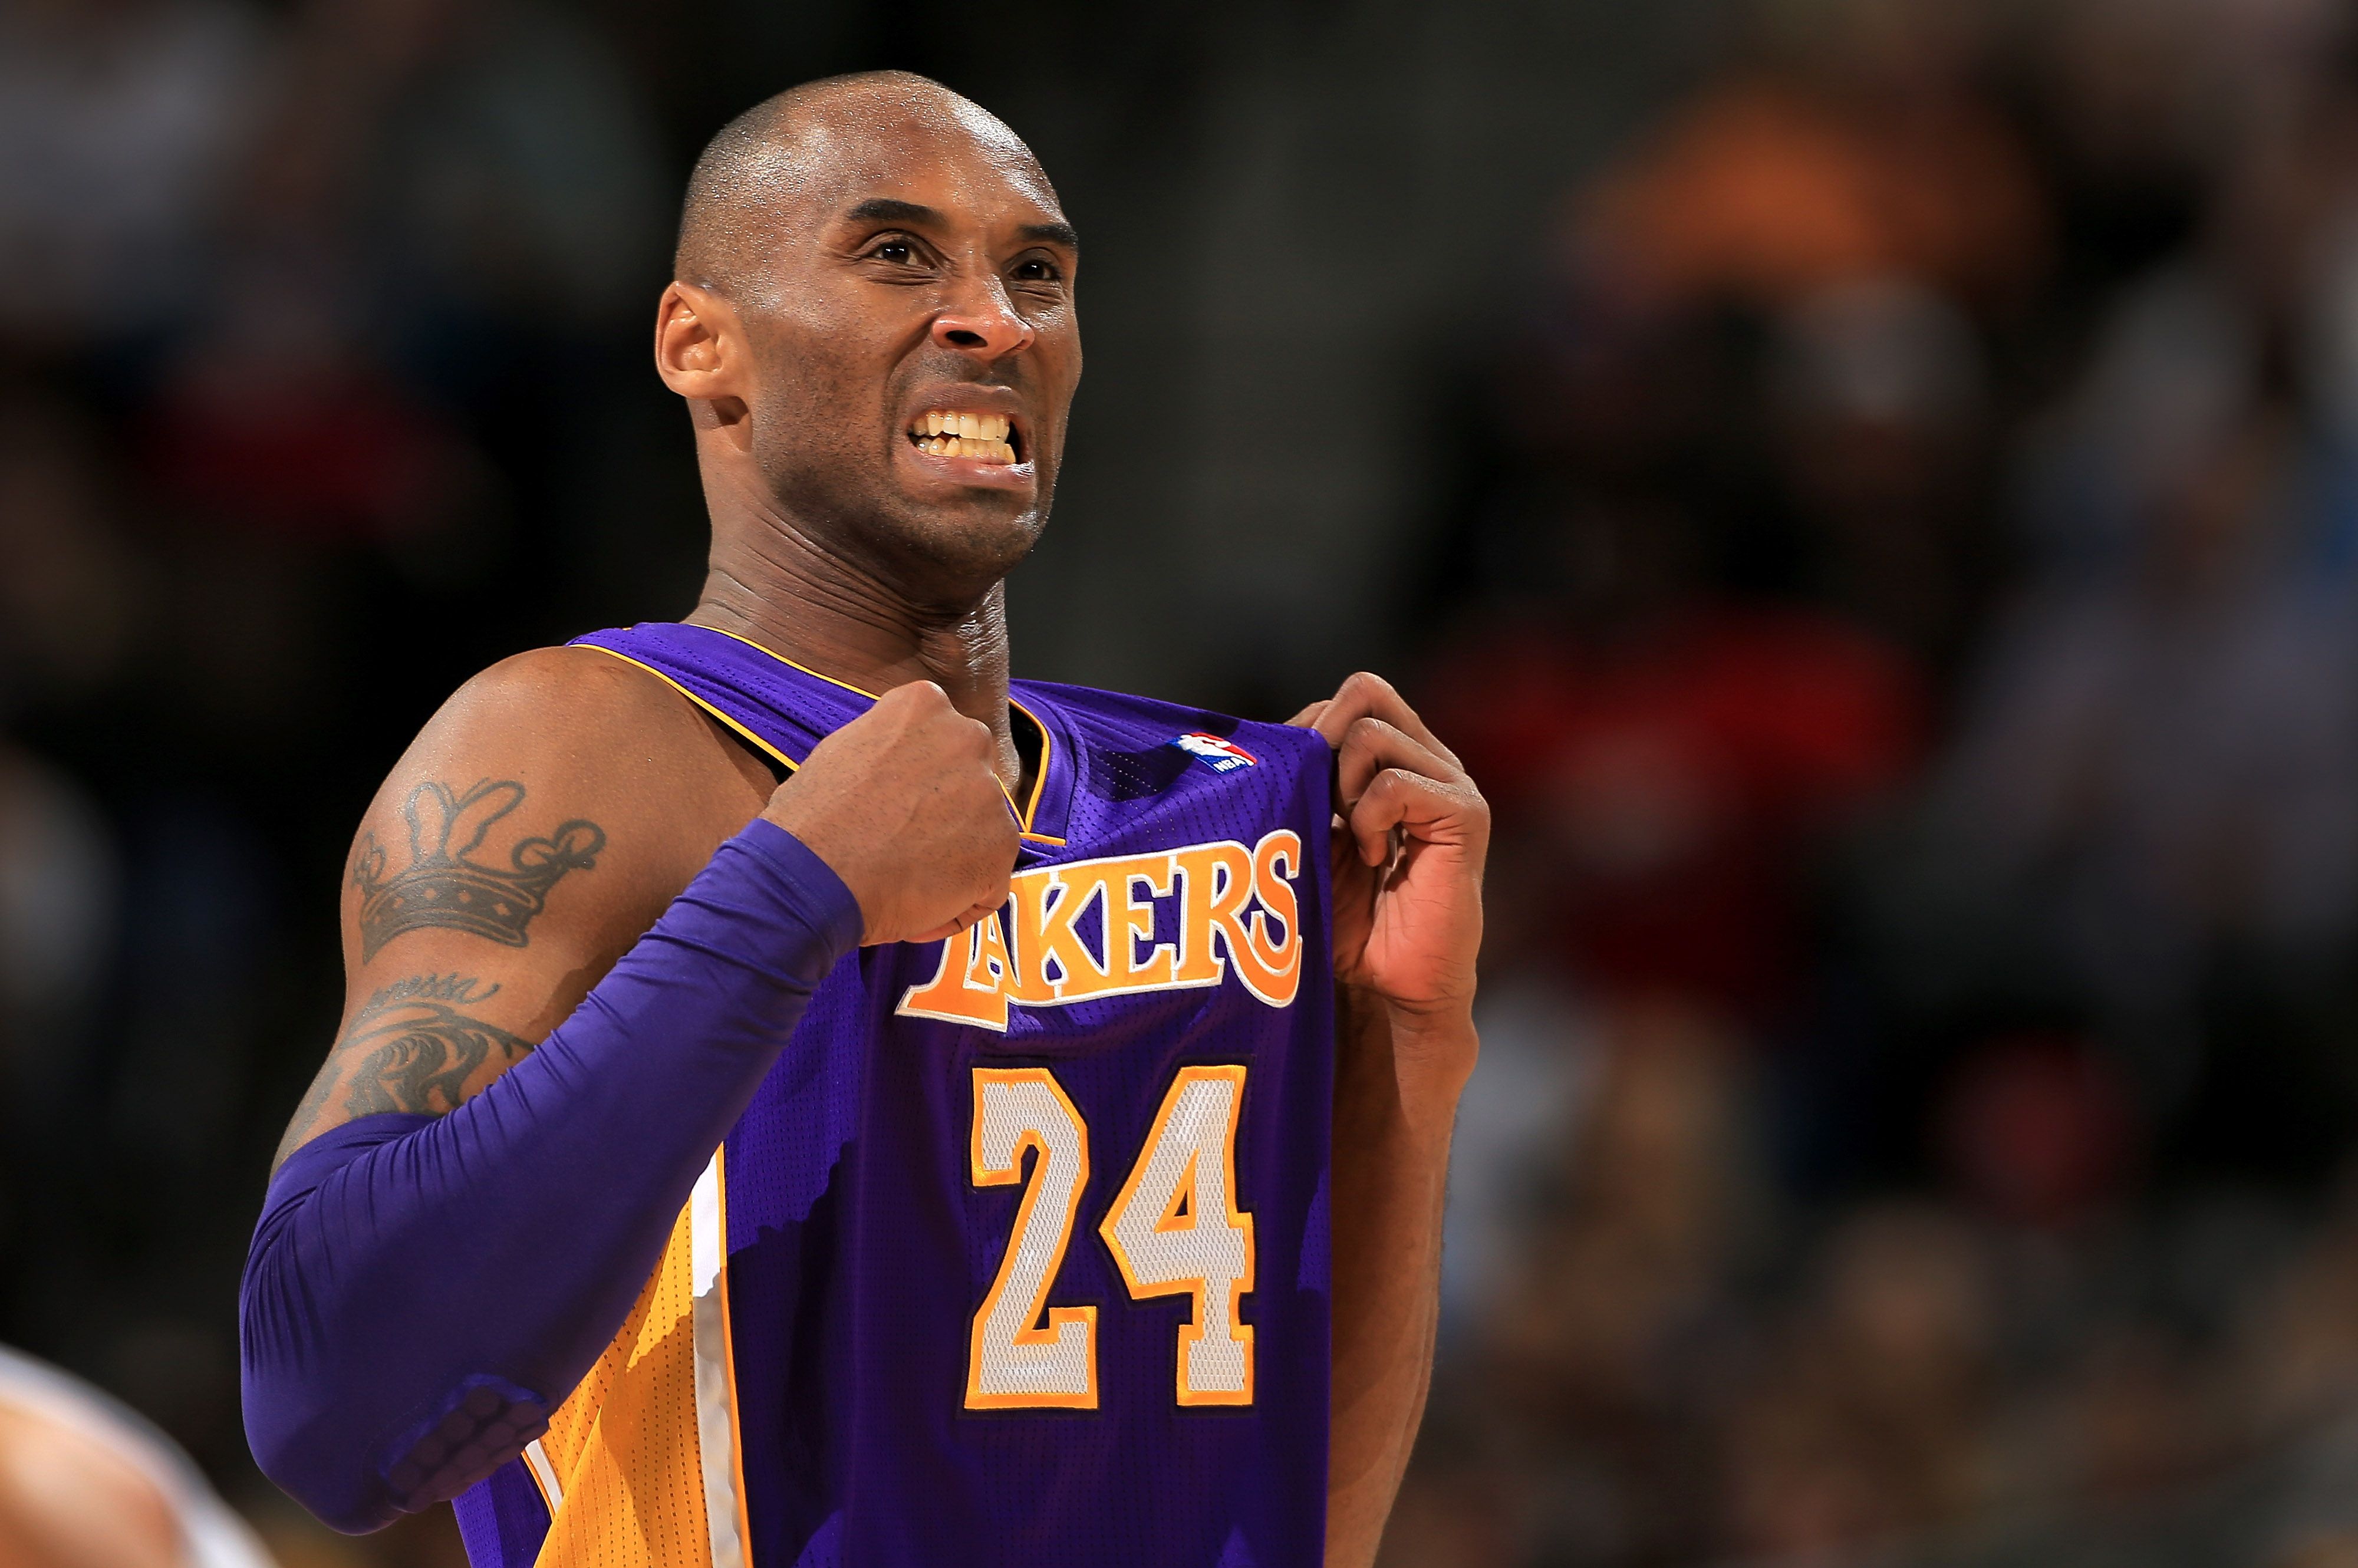 The Lakers' Kobe Bryant is determined to make critics eat humble pie. Photo: AFP